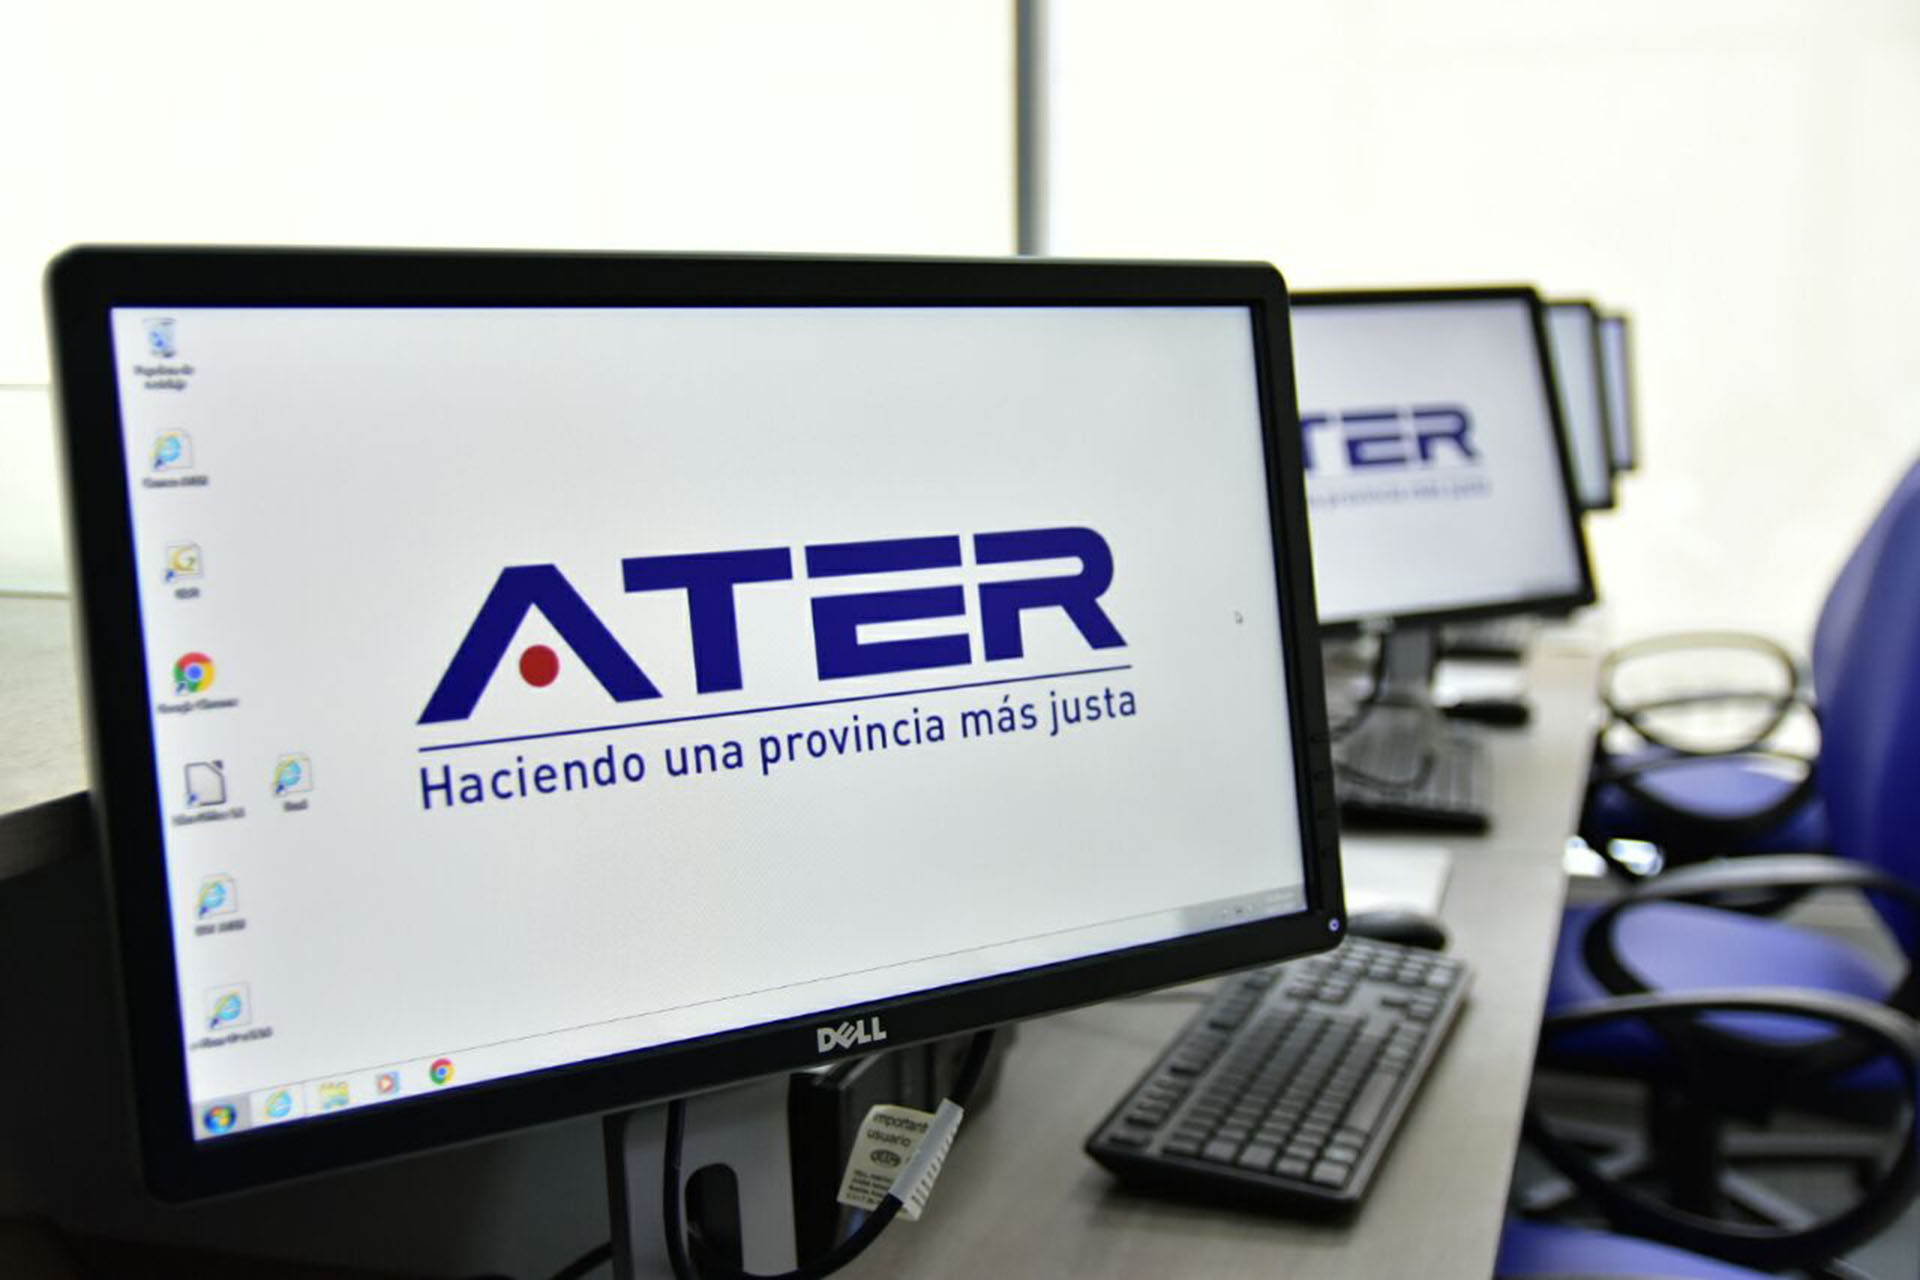 ATER1